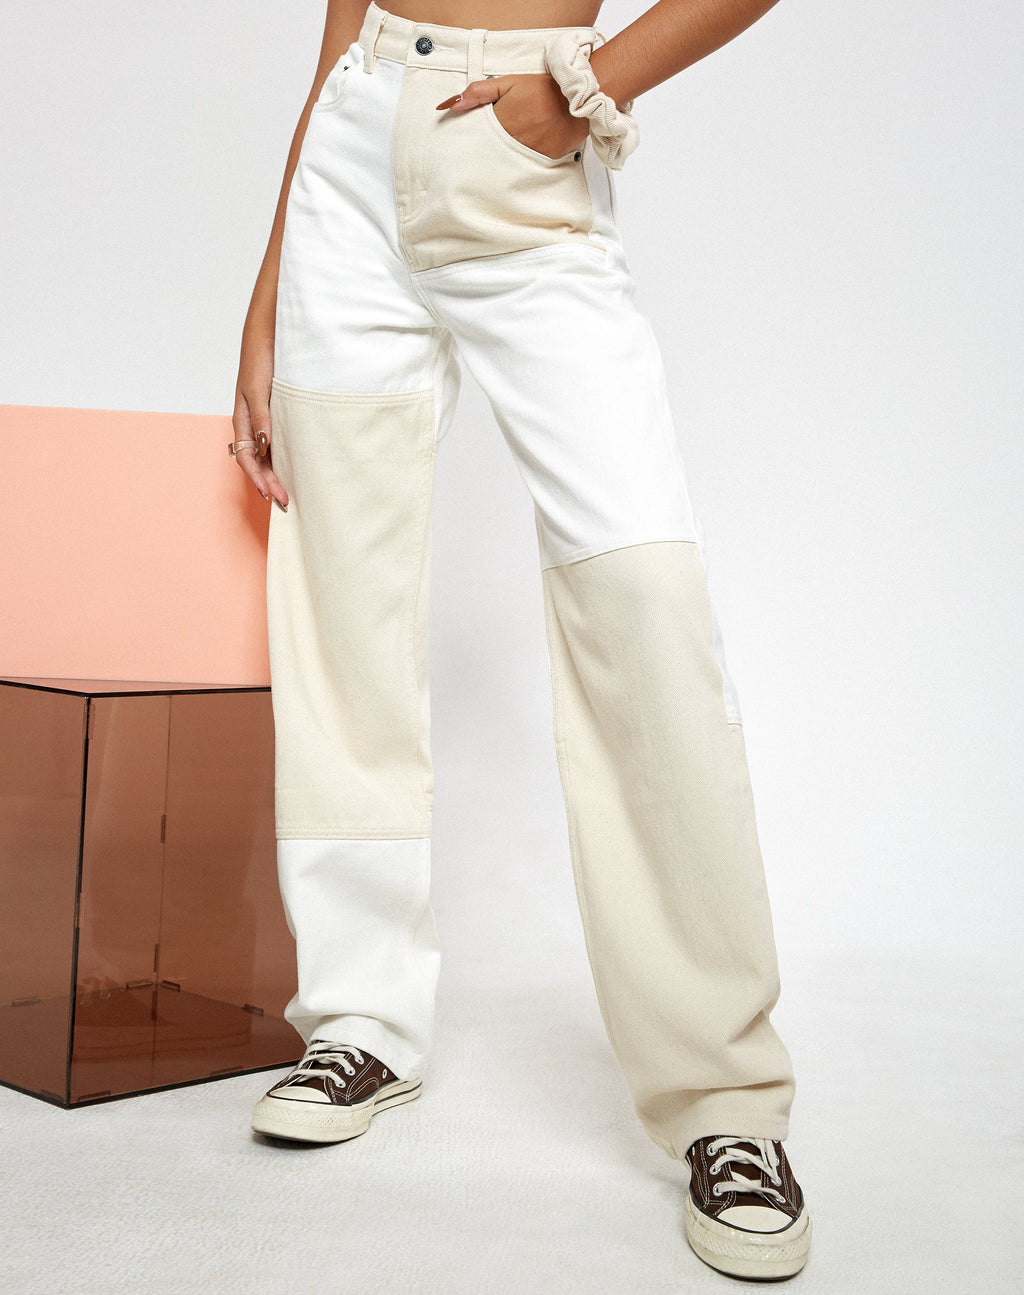 Tonal Panel Parallel Jeans in White and Ecru